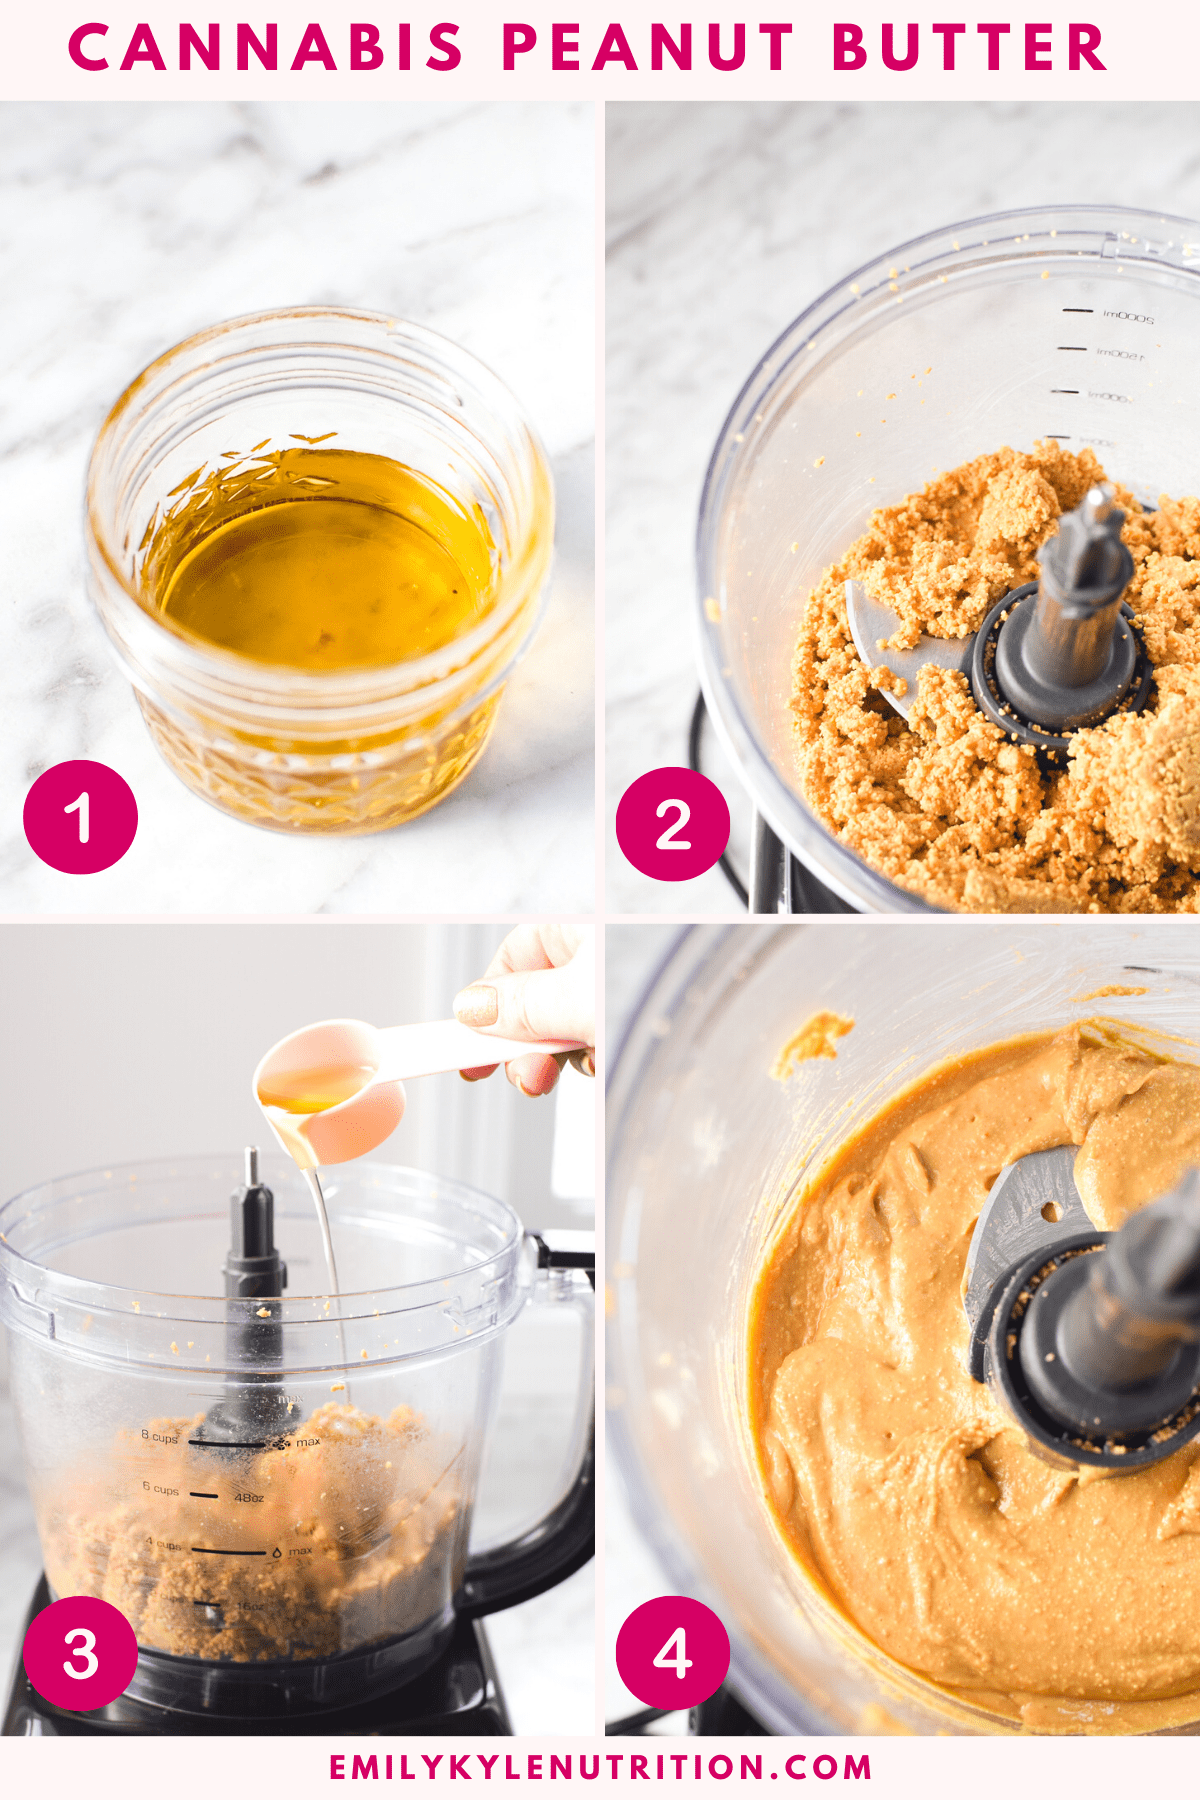 A step-by-step image collage showing how to make cannabis peanut butter with a food processor